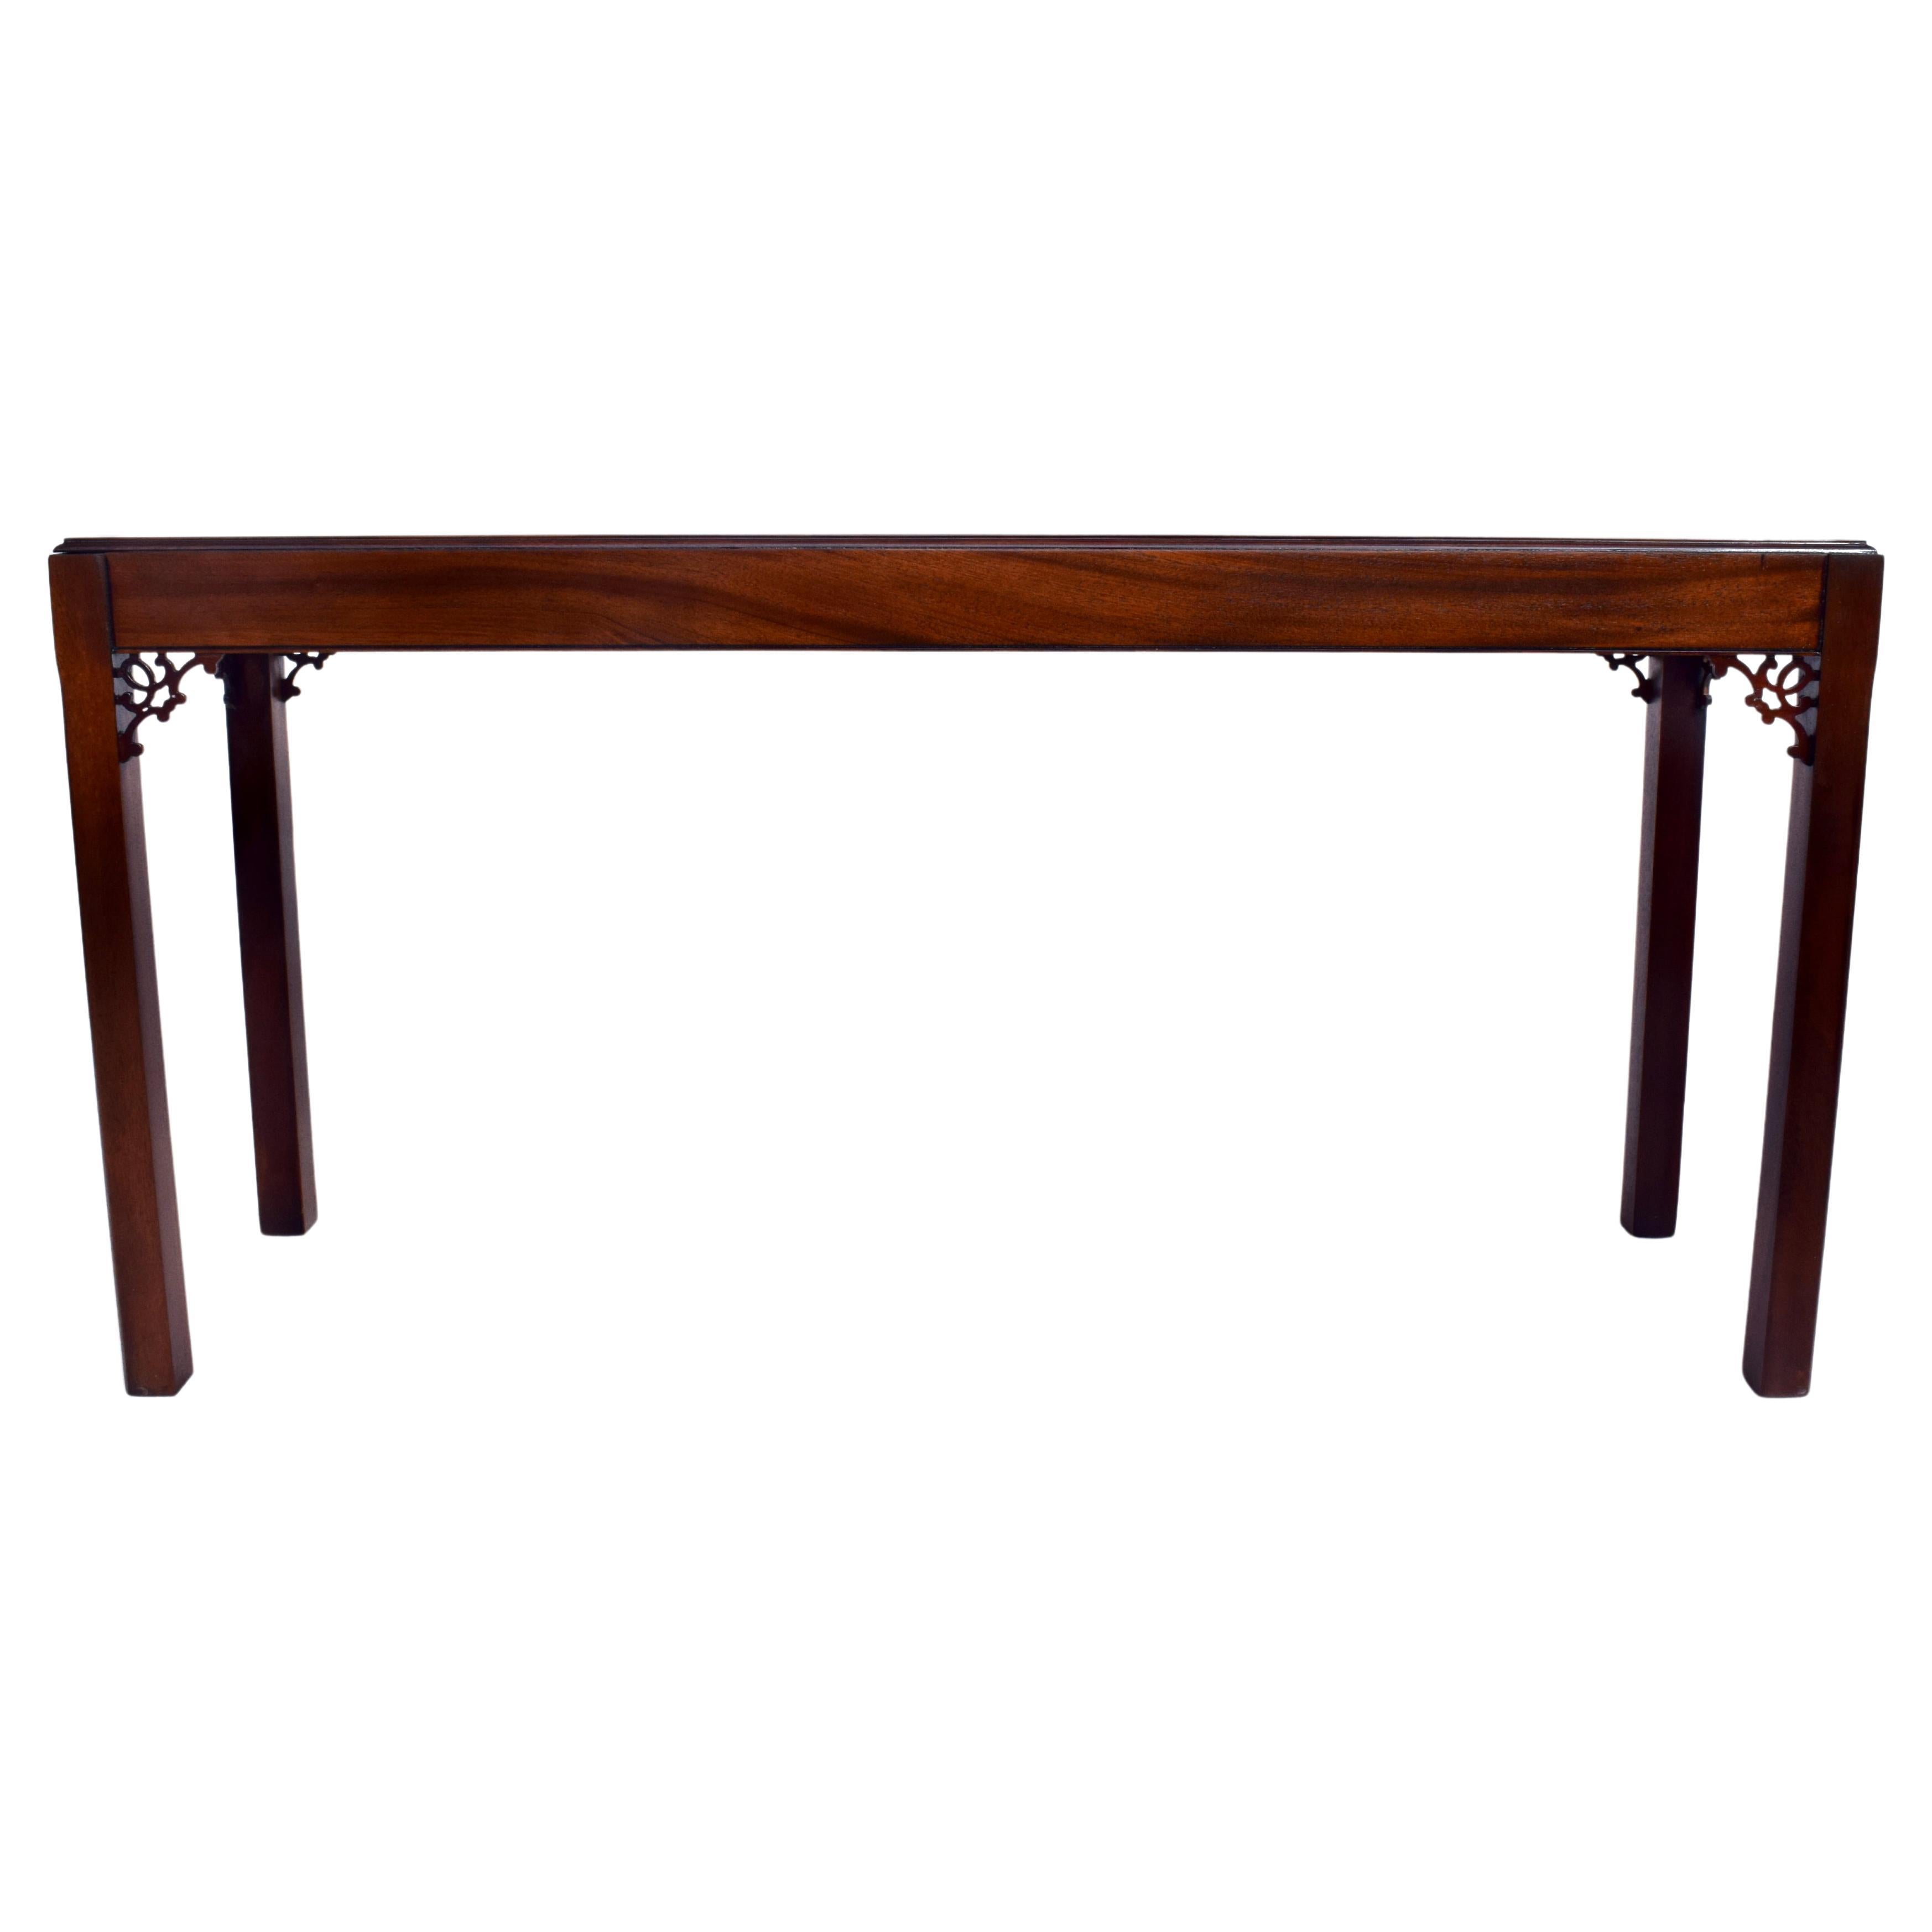 English Chippendale Mahogany Fret Work Console Table